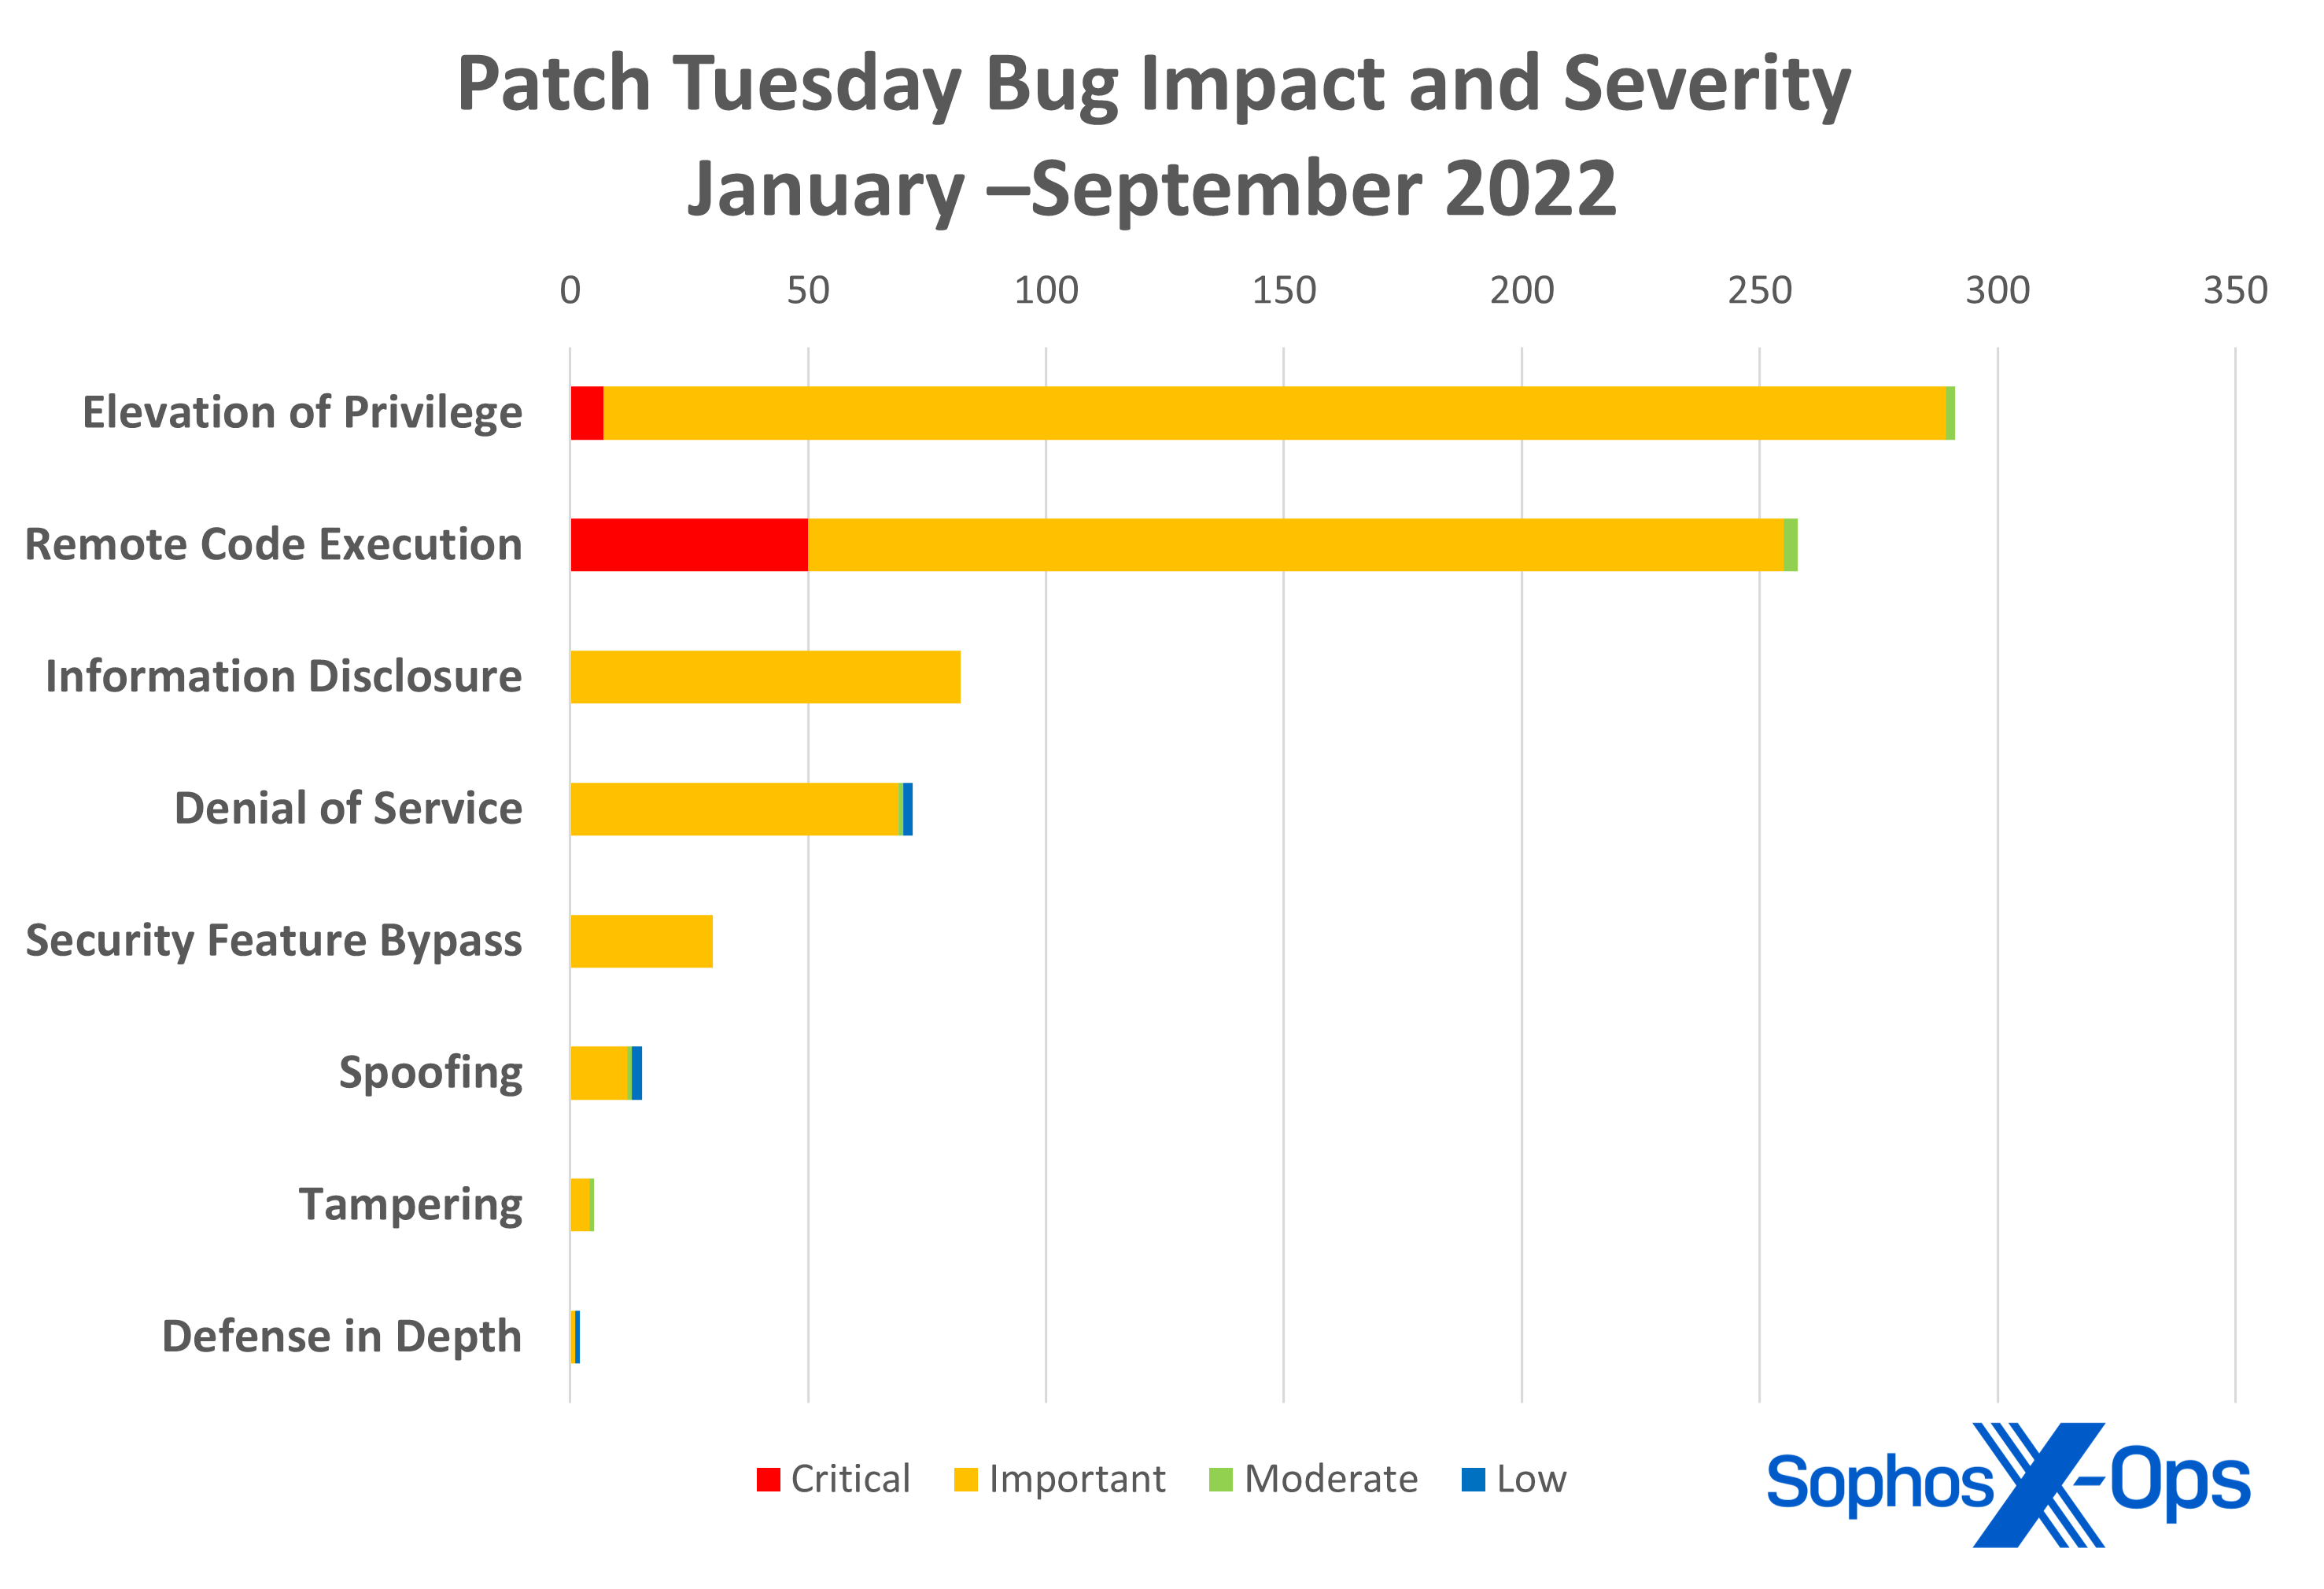 Bar chart showing impact and severity for cumulative vulnerabilities in 2022 Patch Tuesday releases